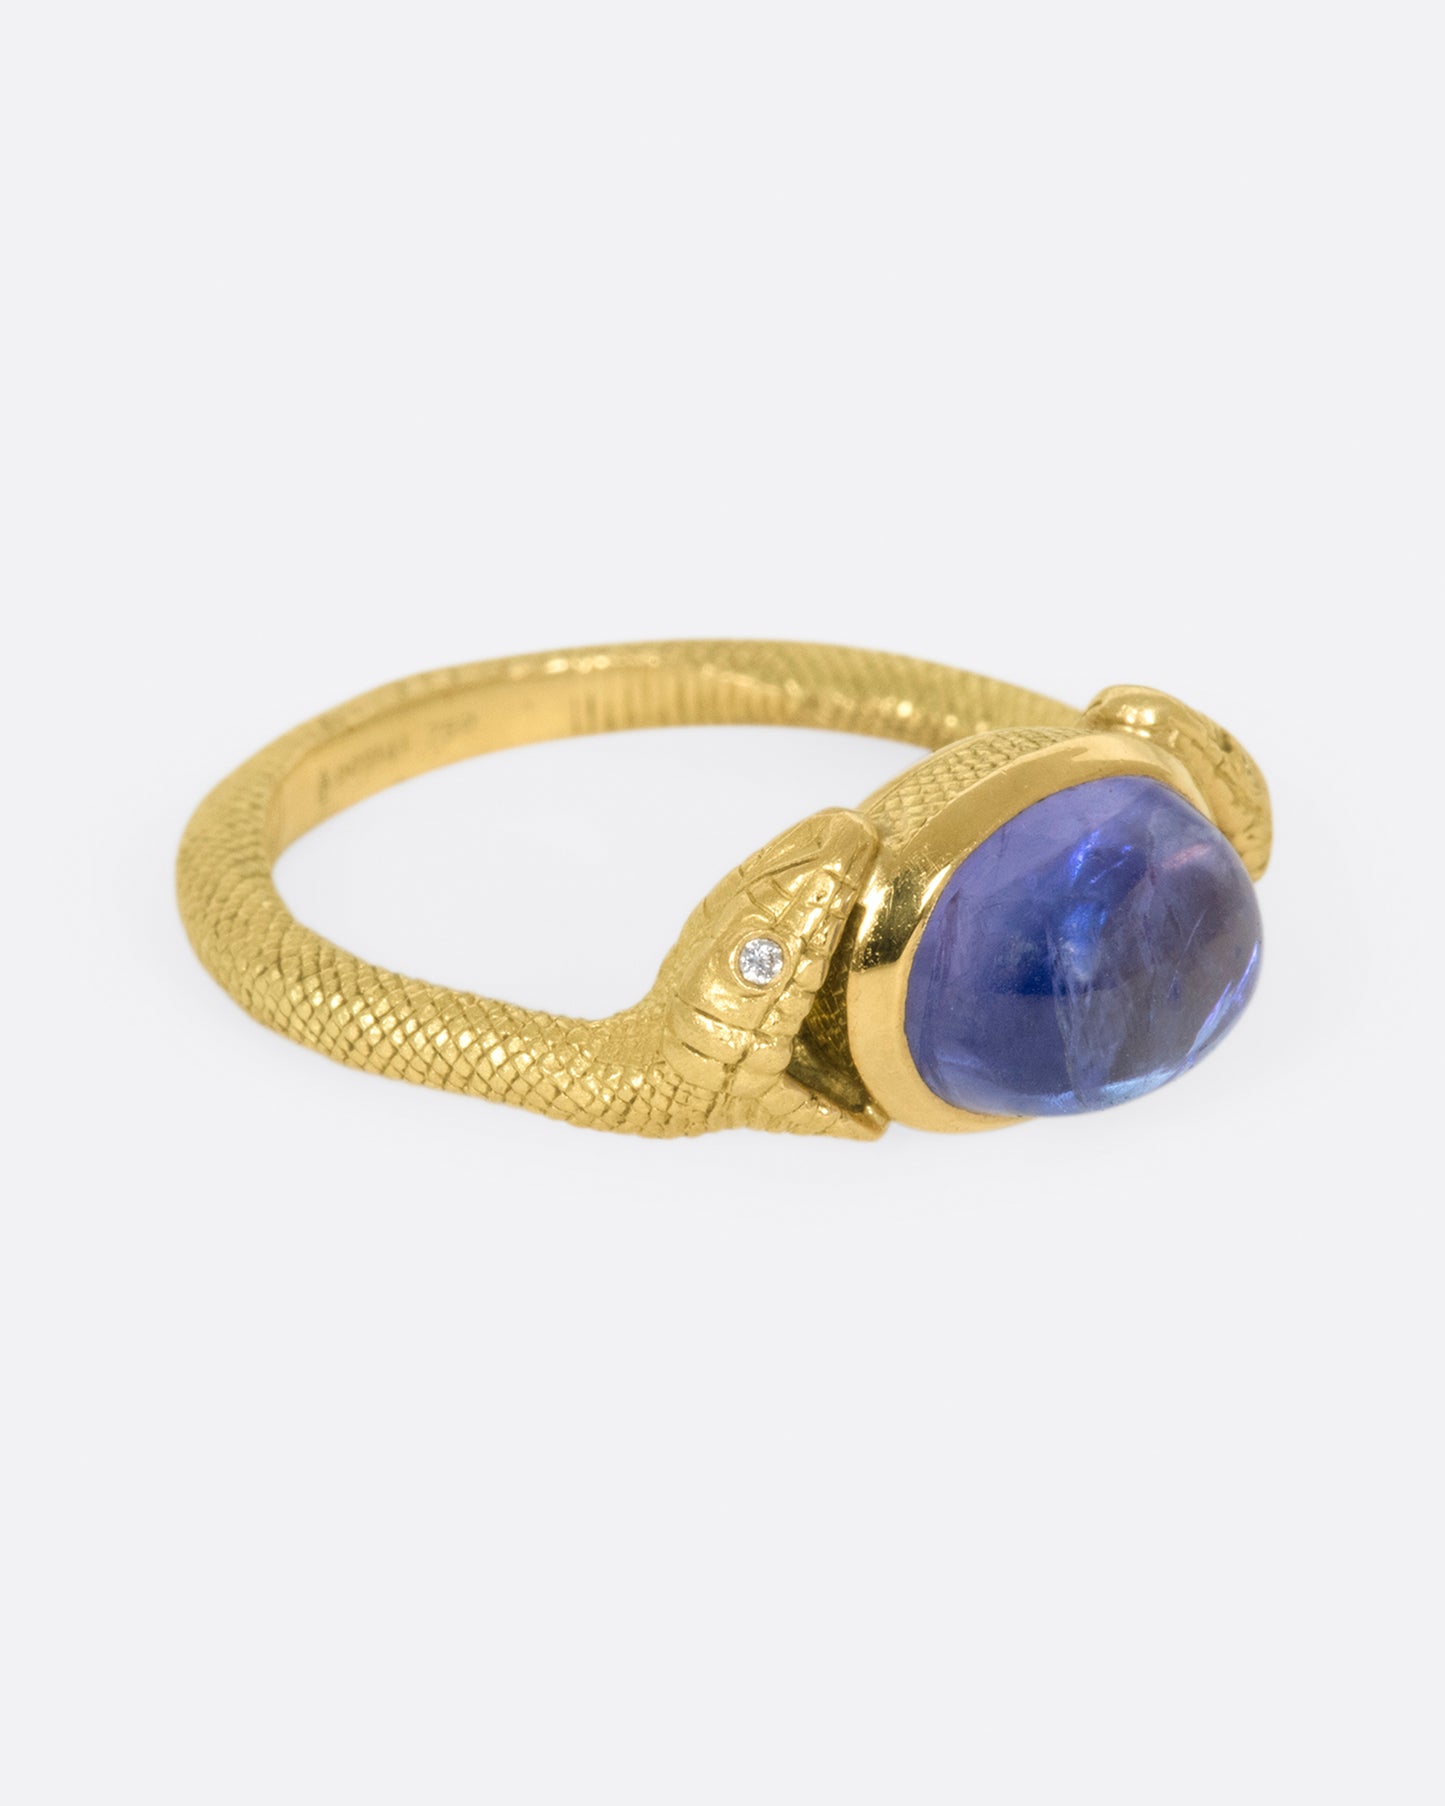 On the one hand, snakes represent Biblical personifications of evil, and on the other they symbolize health and healing; this pair encompass a saturated tanzanite cabochon.